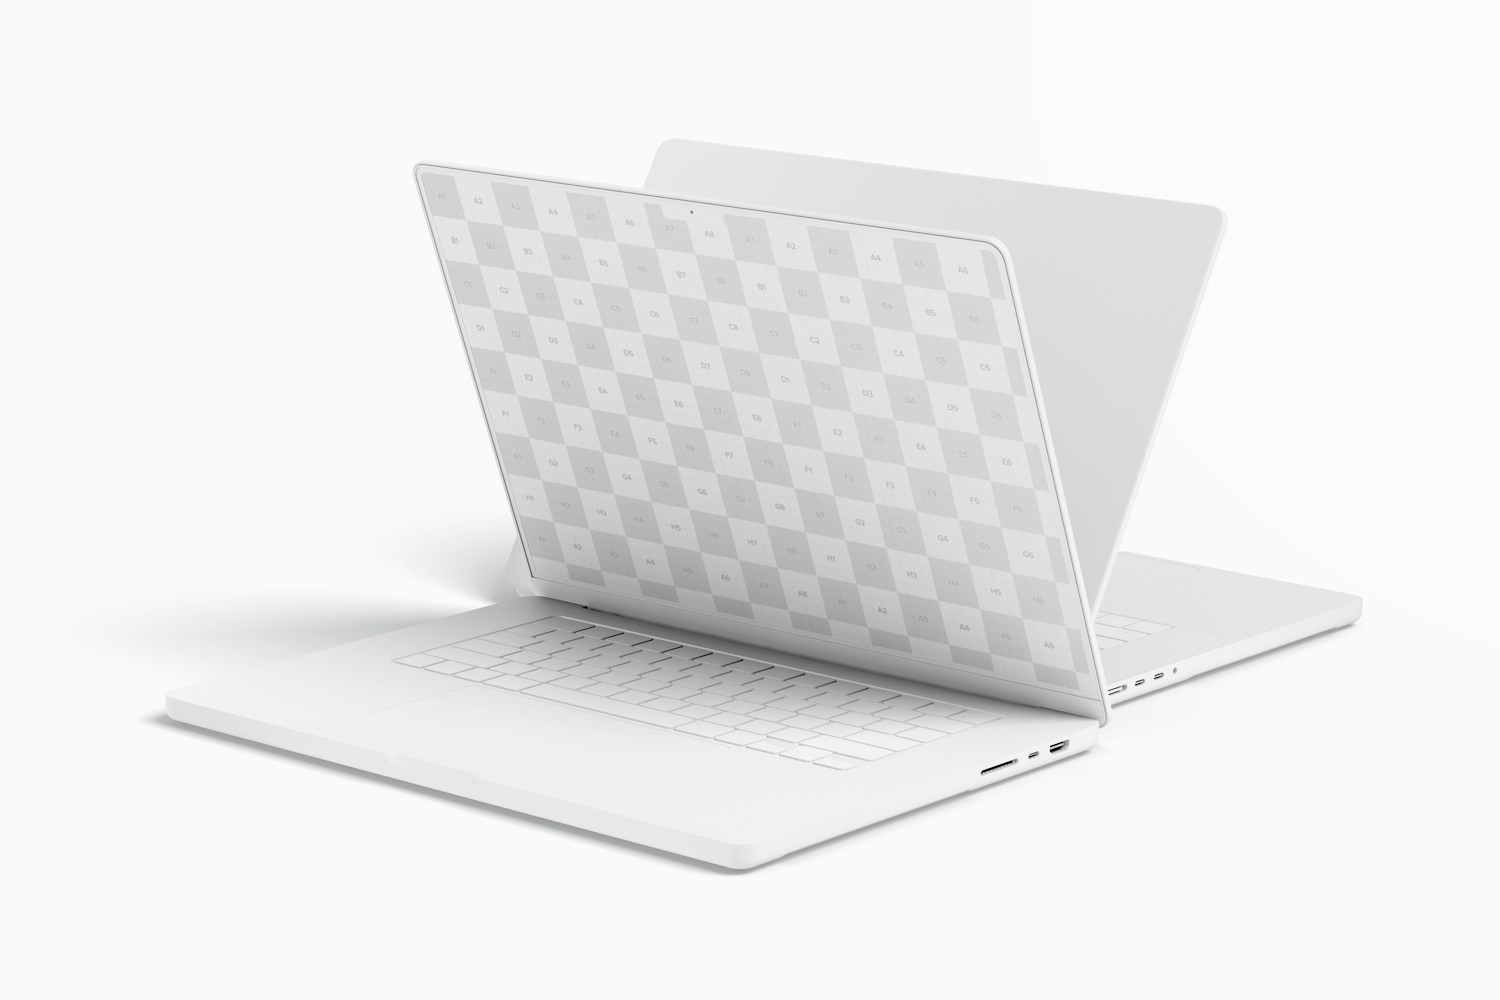 Clay MacBook Pro Mockup, Right View